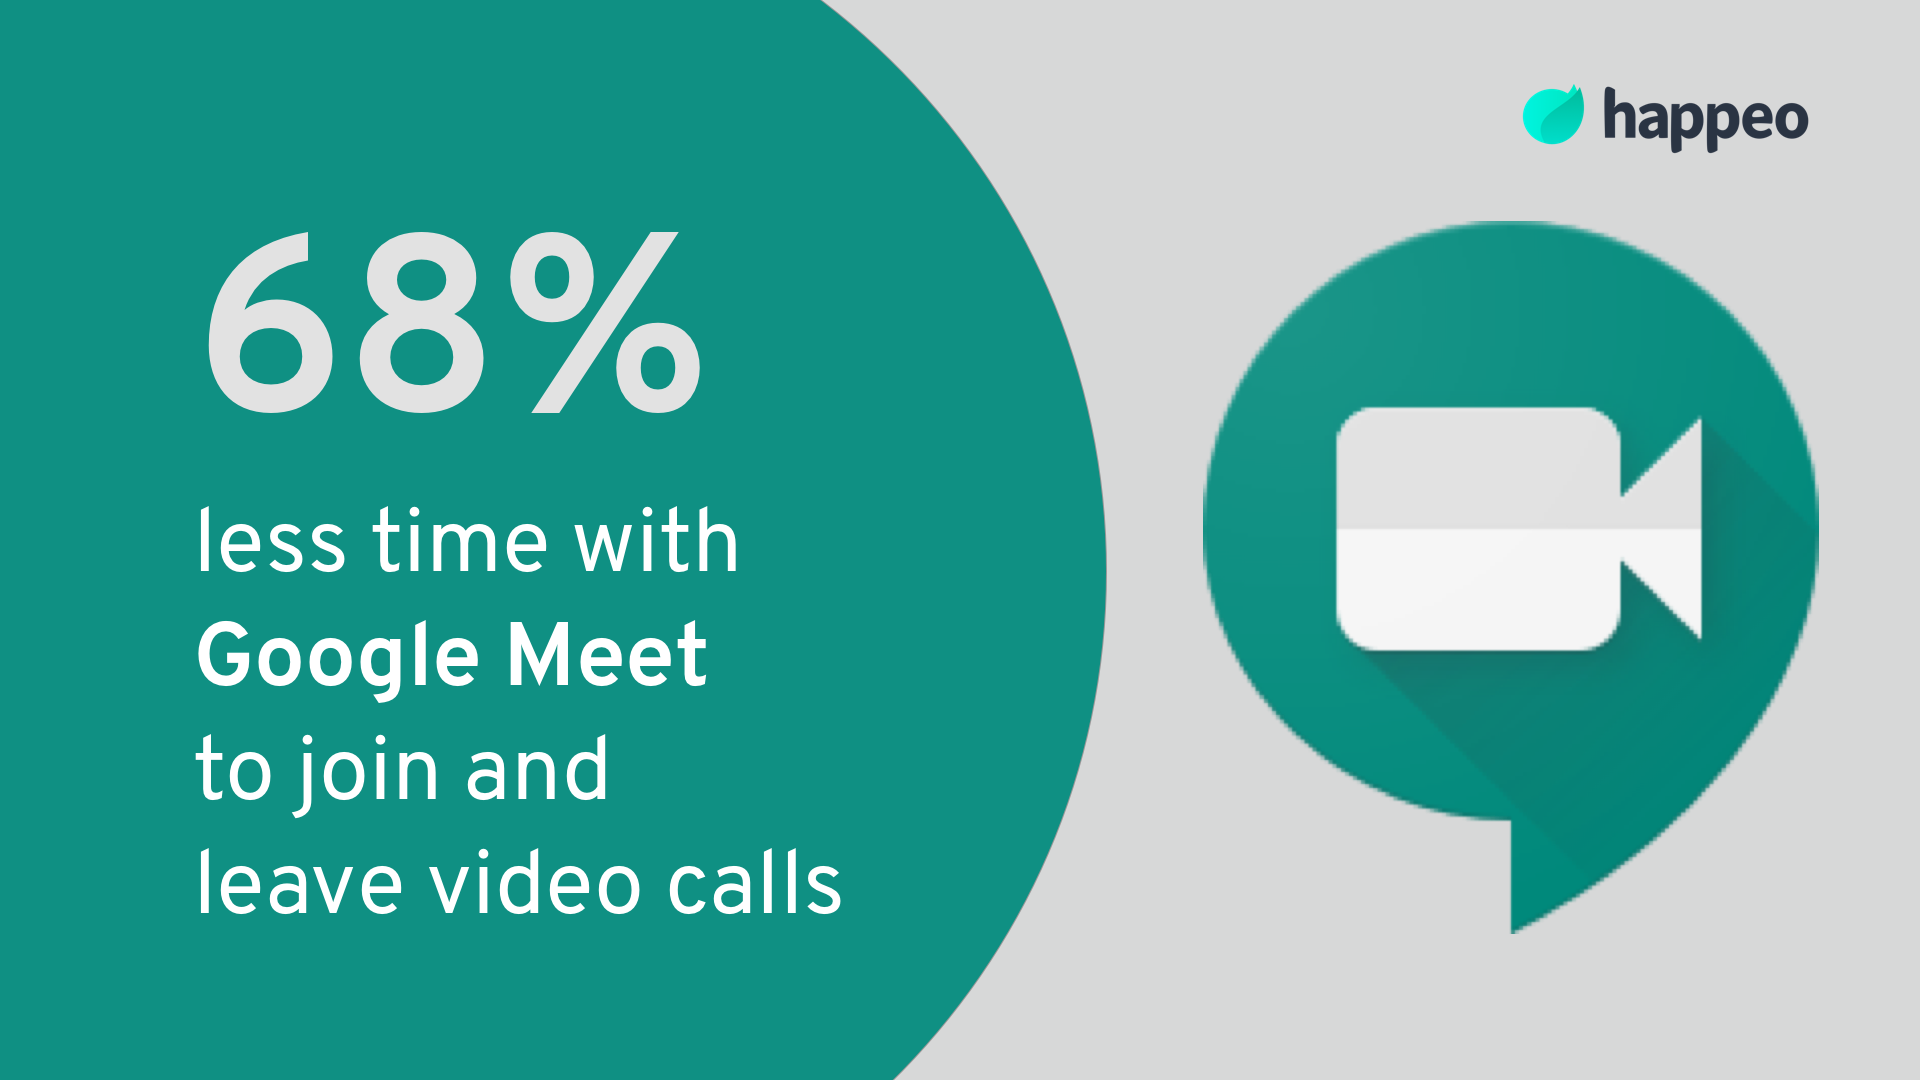 68% less time with Google Meet to join and leave video calls